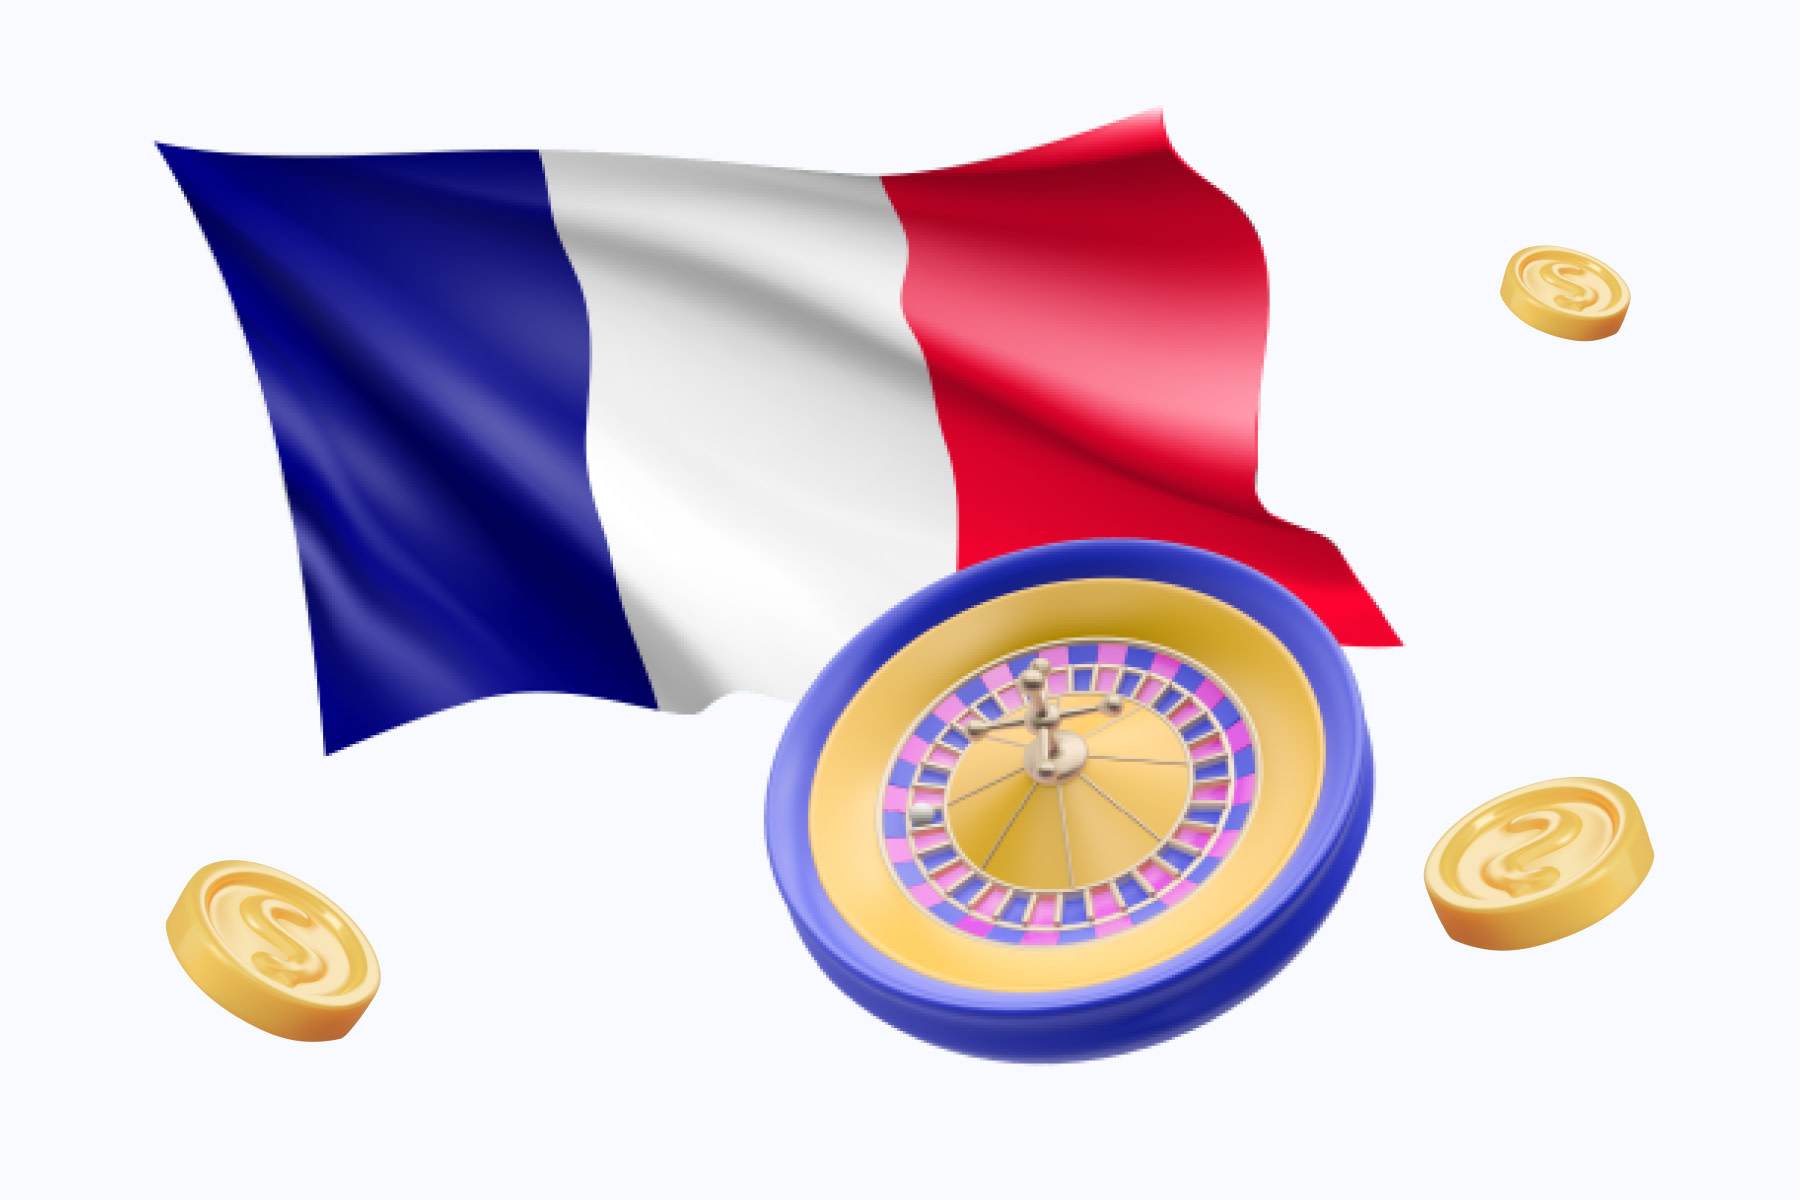 Image of the flag of France with a roulette wheel